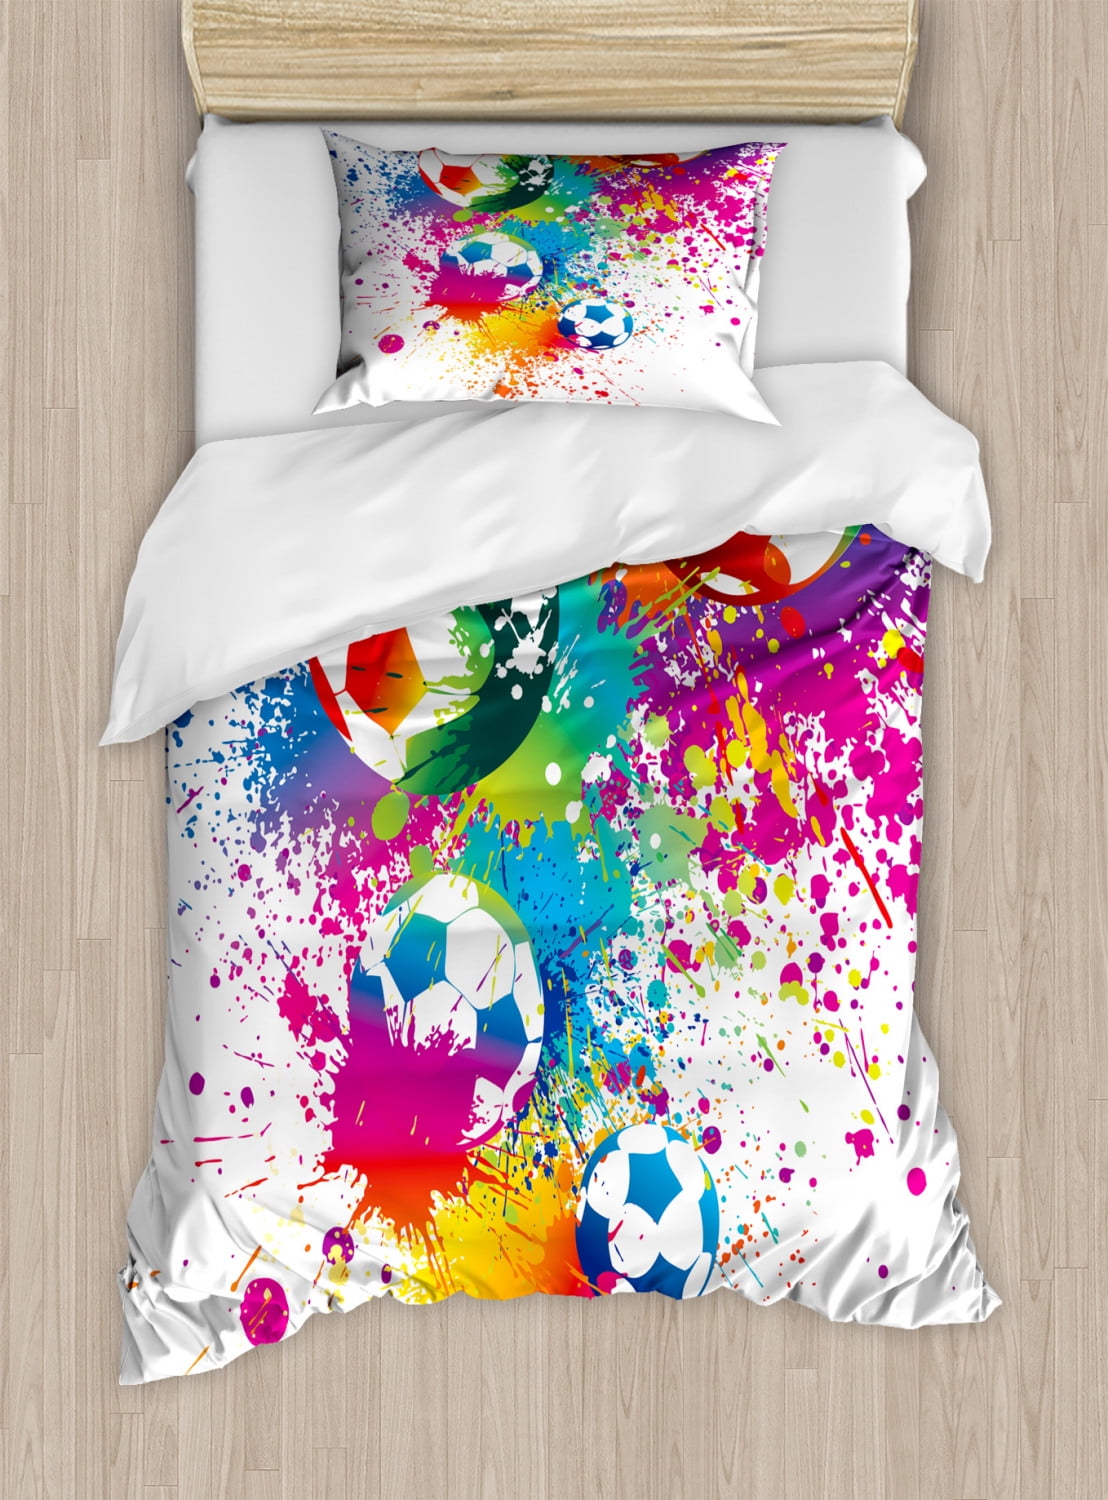 Soccer Duvet Cover Set Twin Size, Colored Splashes All over Soccer Balls  Score World Cup Championship Athletic Artful, Decorative 2 Piece Bedding  Set 